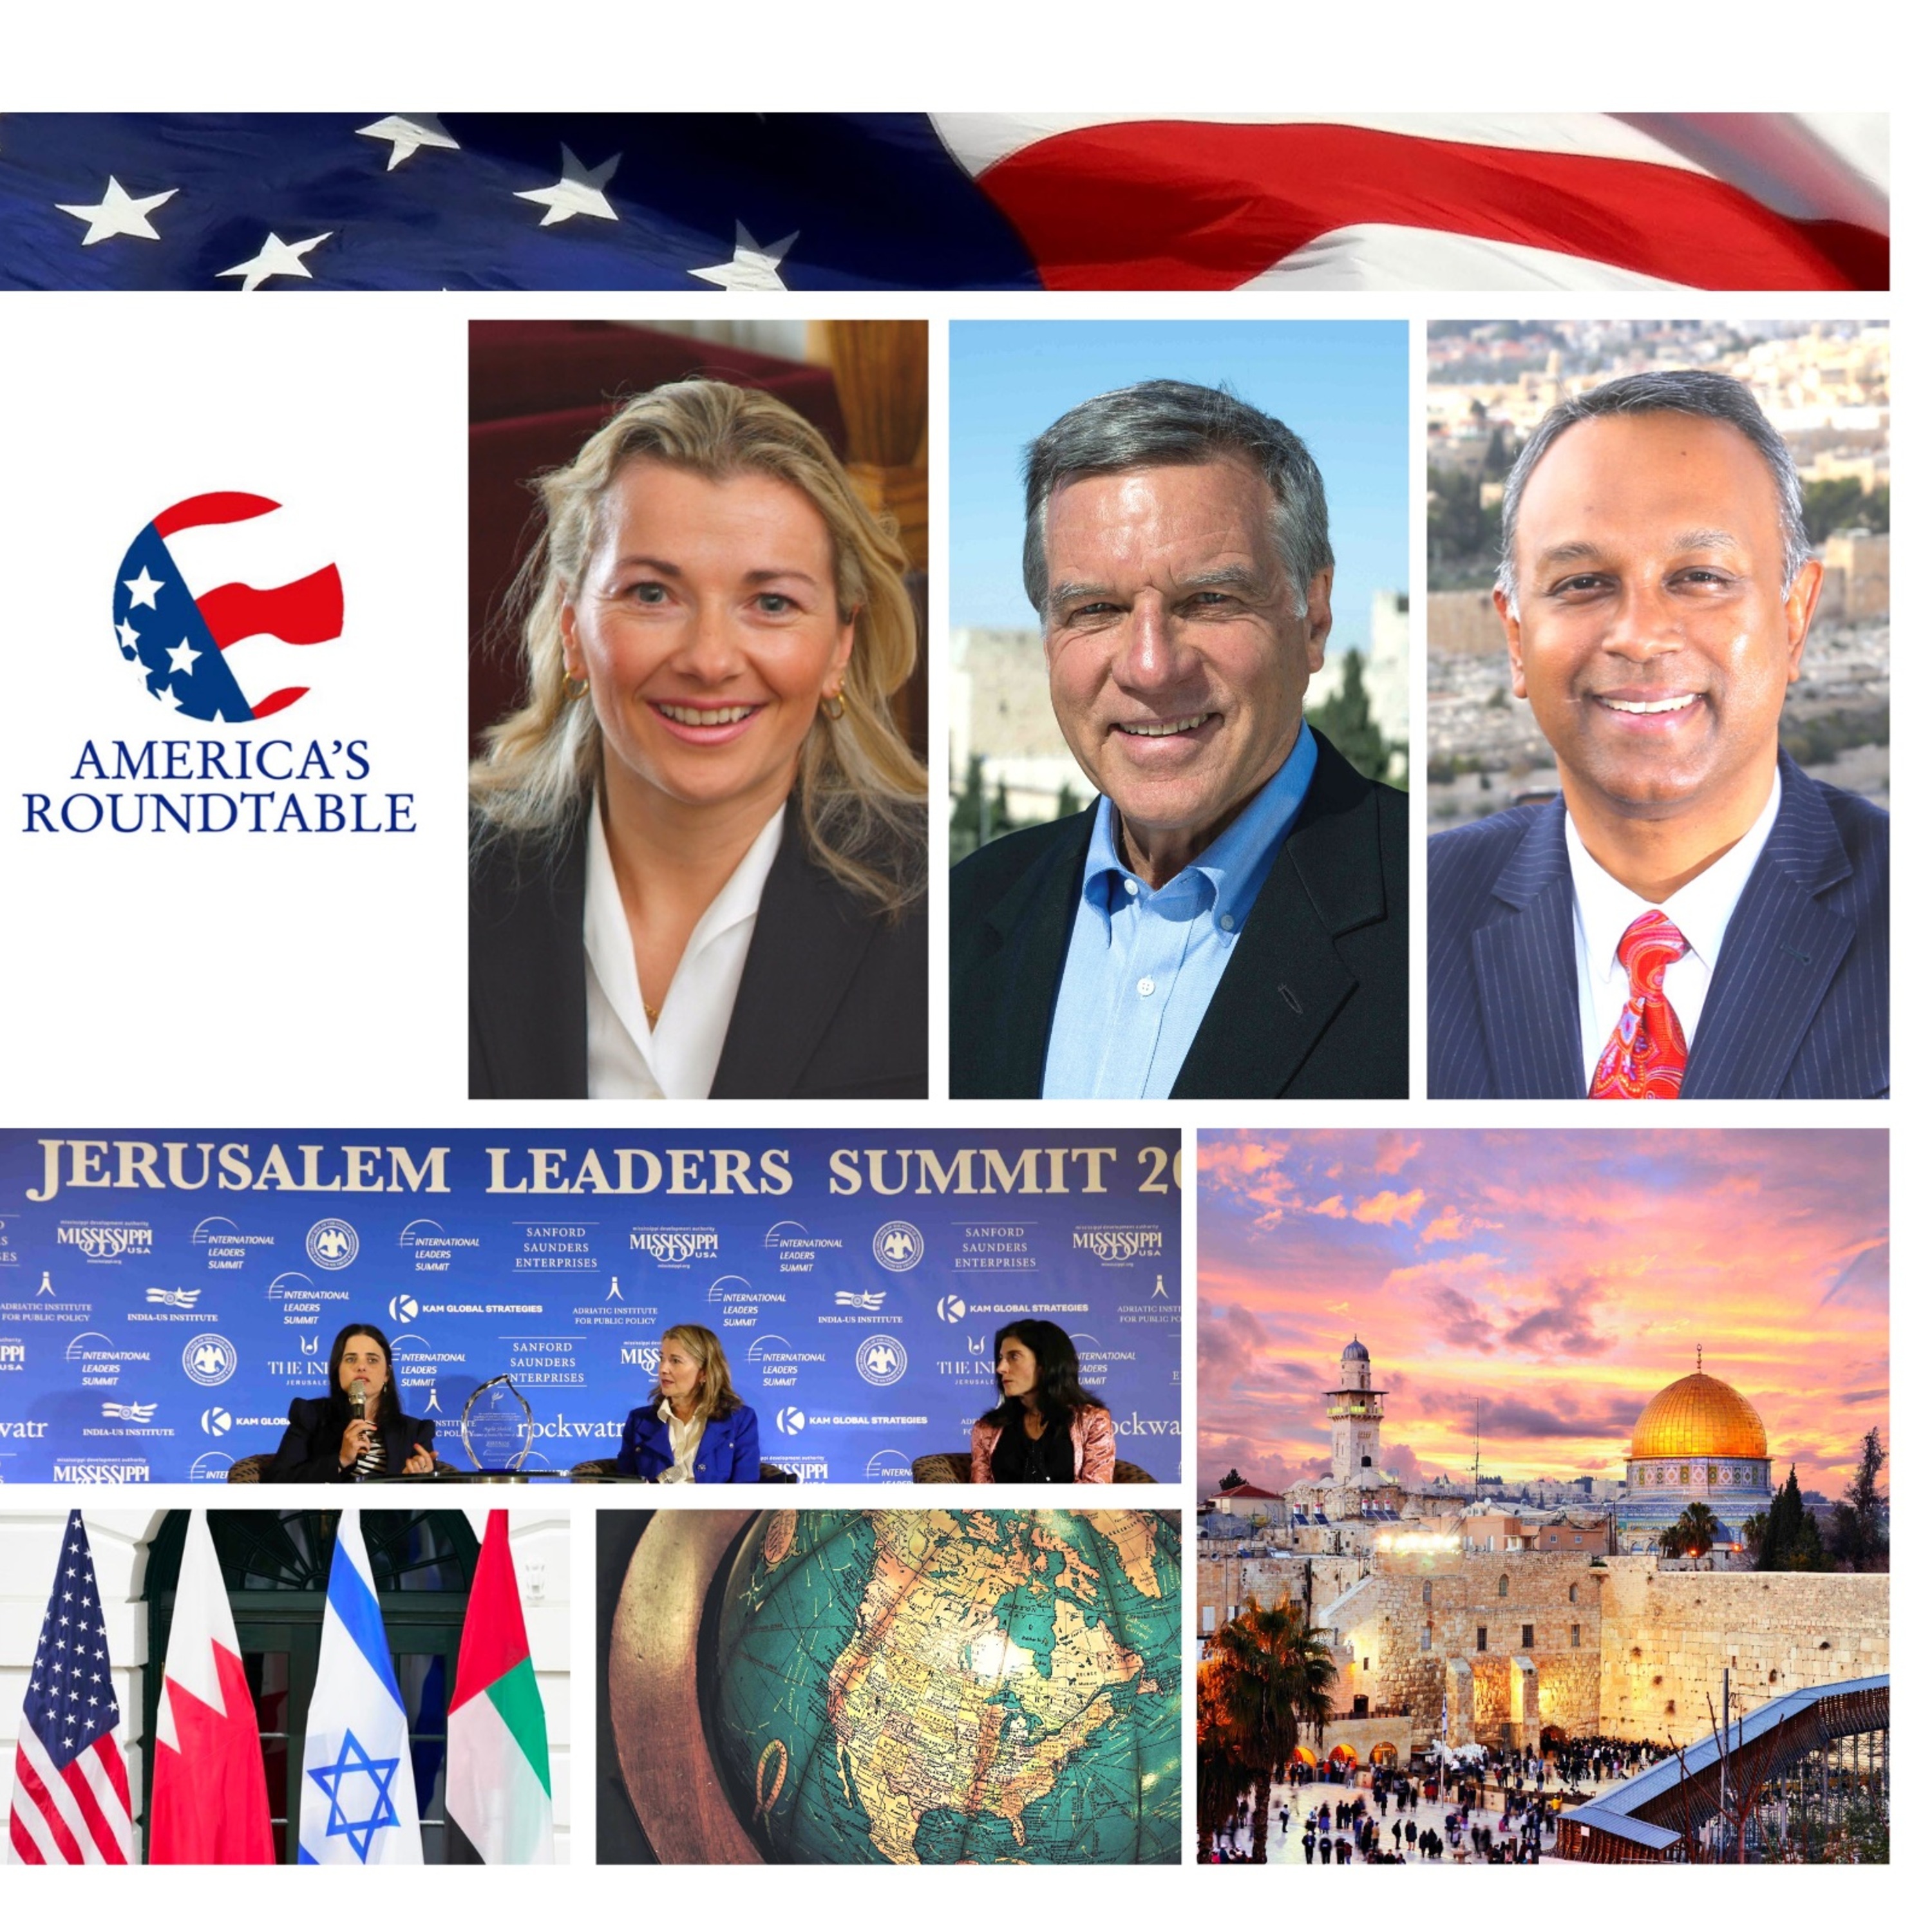 Chris Mitchell | Update from Israel on Christmas Day | US-Israel Relations | Iran Nuclear Threat | The Abraham Accords